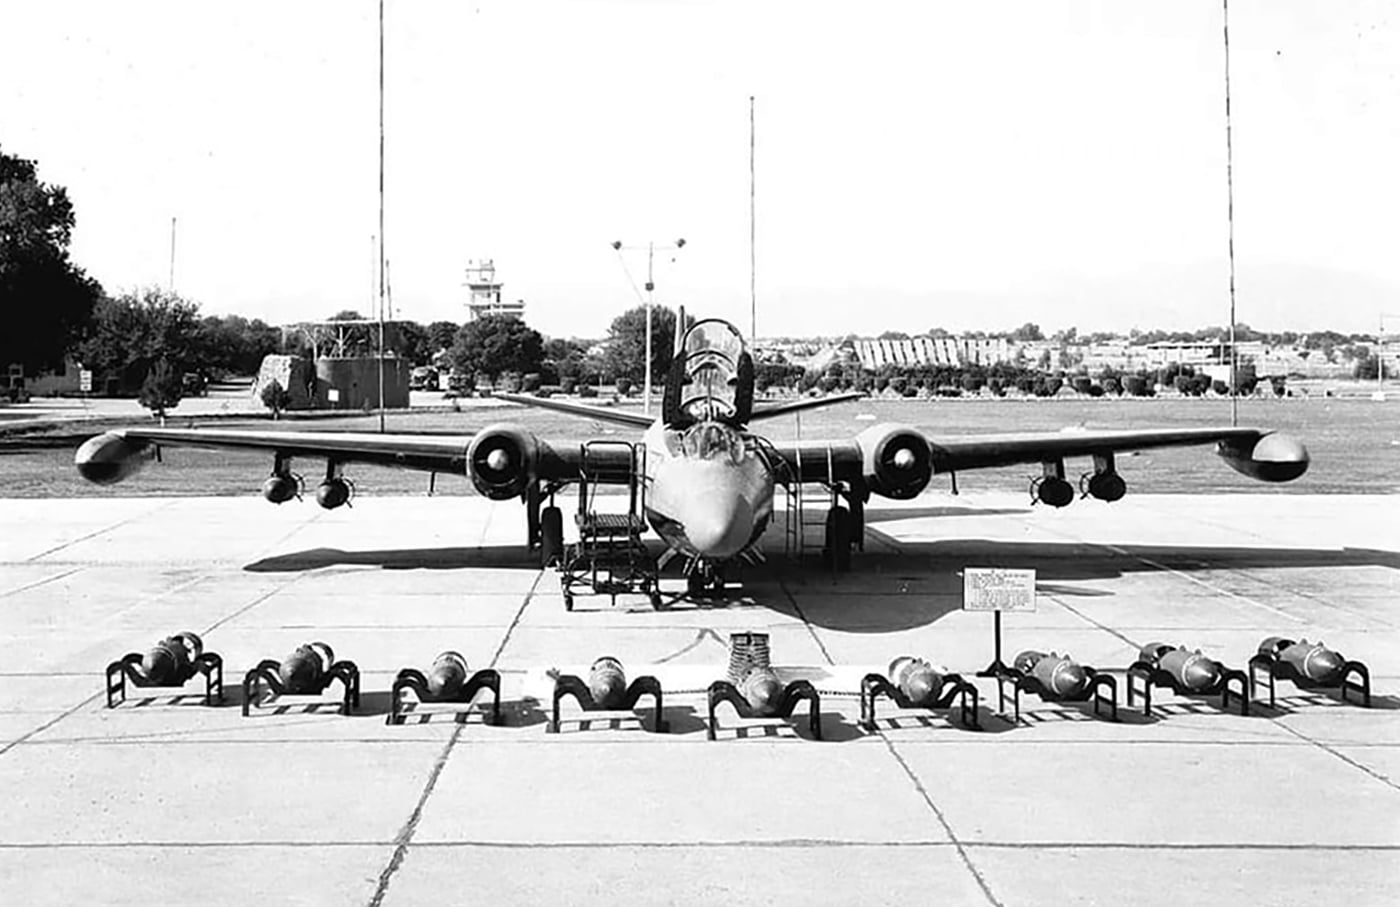 In this photograph a Martin B-57 in Pakistan Air Force is on display with its full armament.